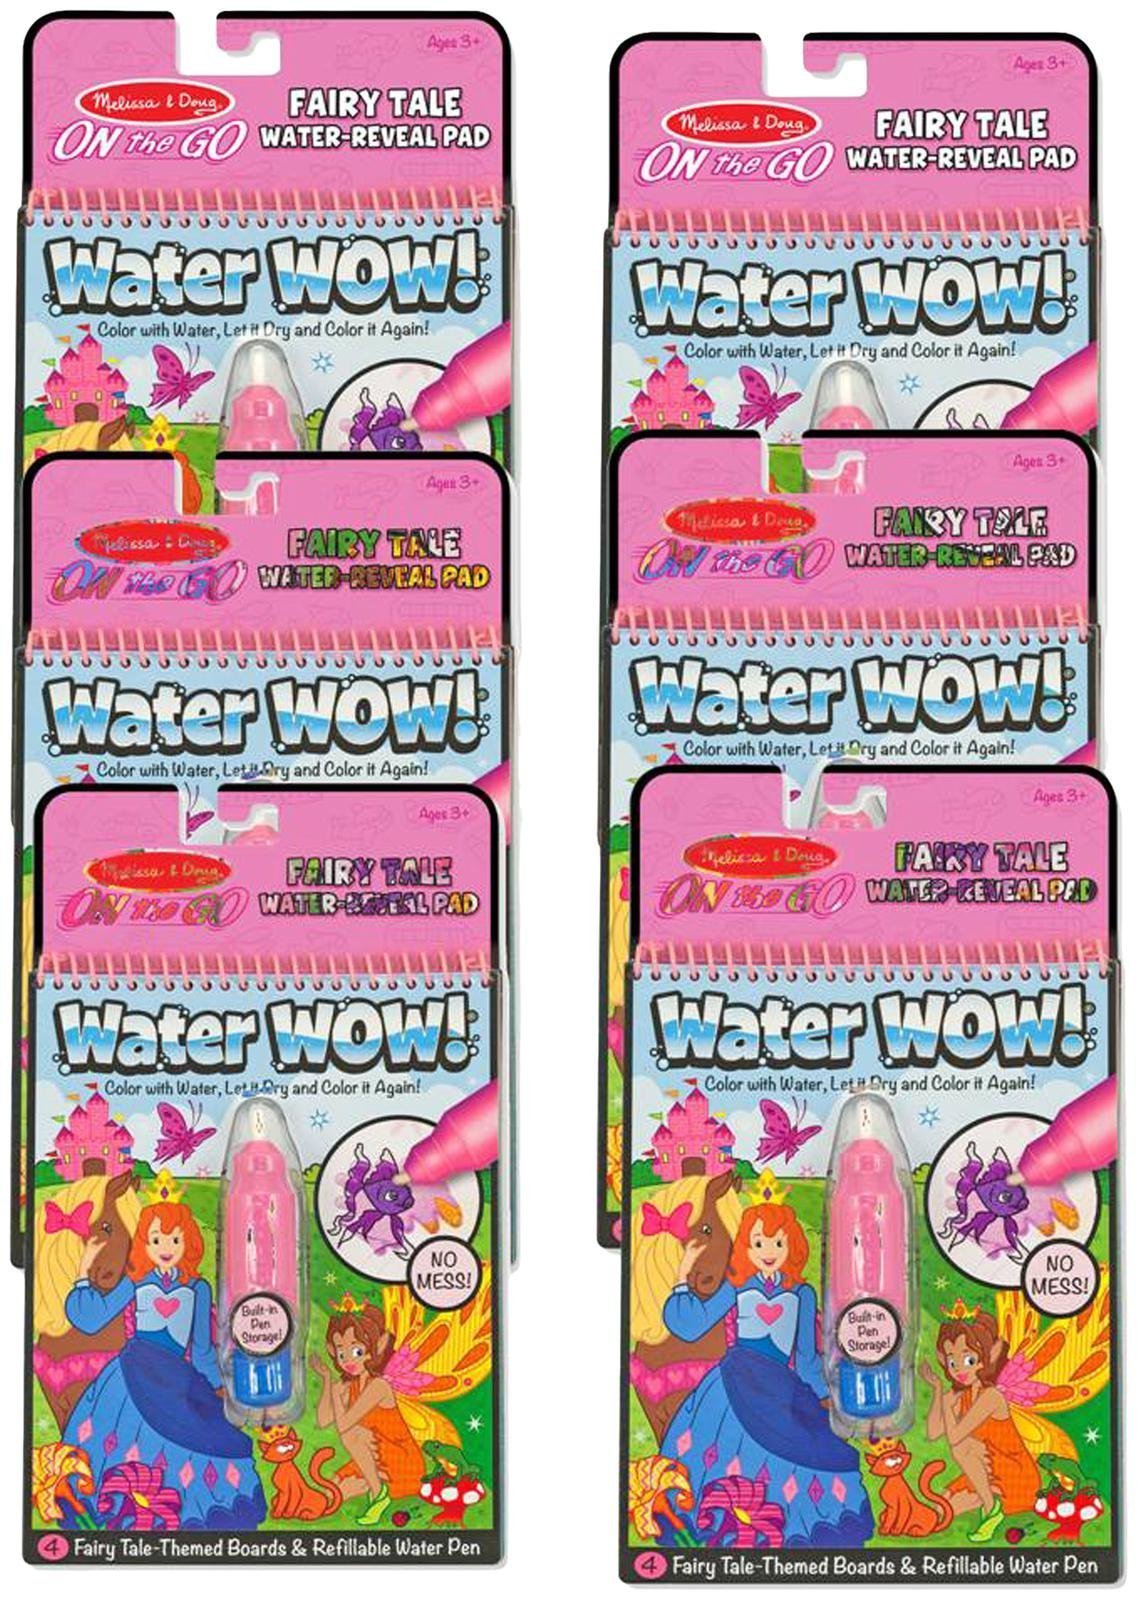 Melissa & Doug On The Go Water Wow! Activity Book, 6-Pack - Fairy Tale Toy